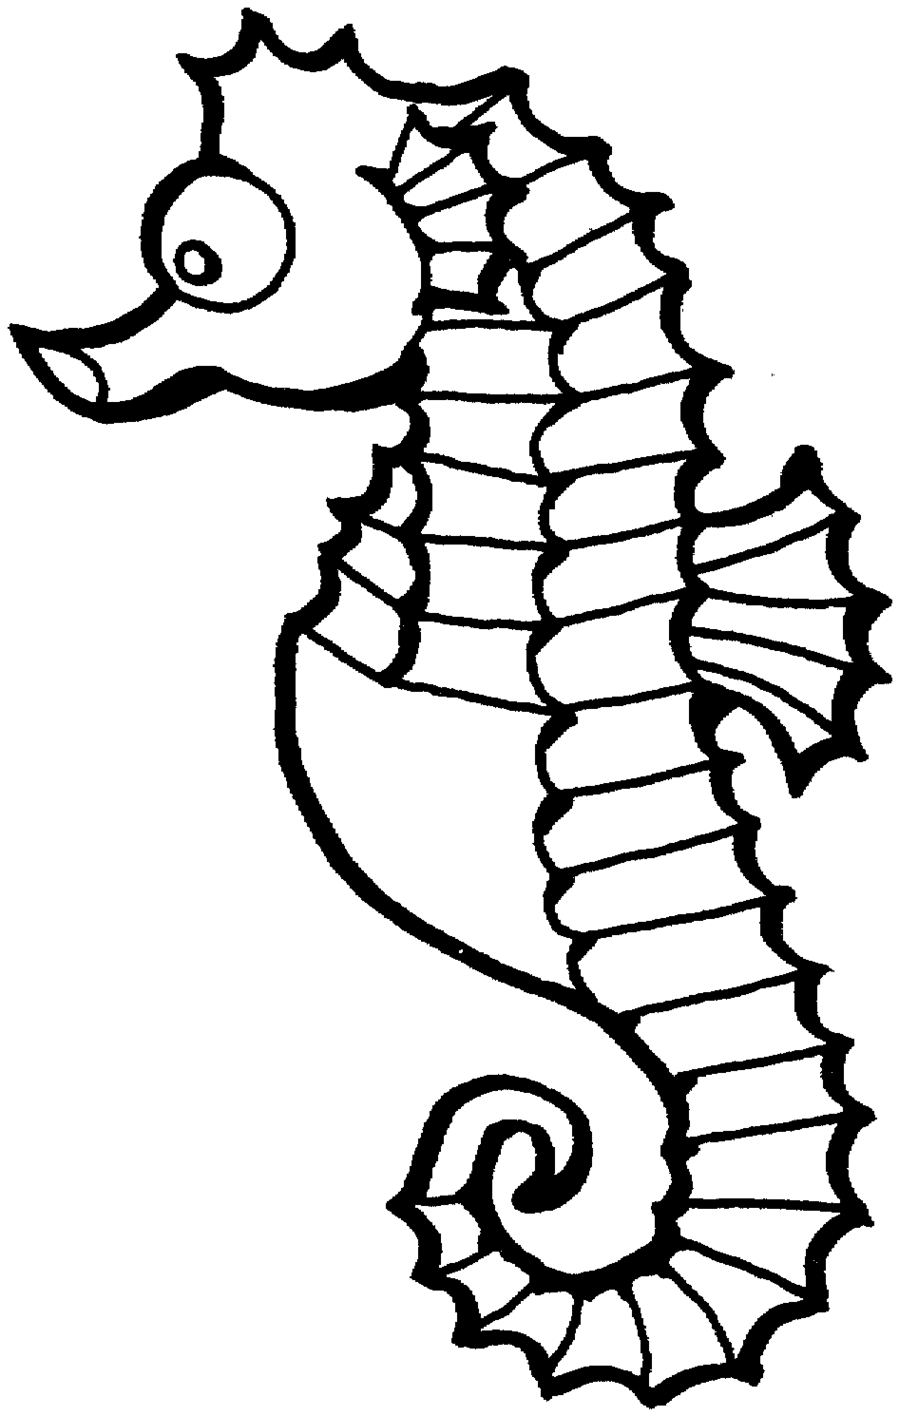 seahorse-outline-template-clipart-best